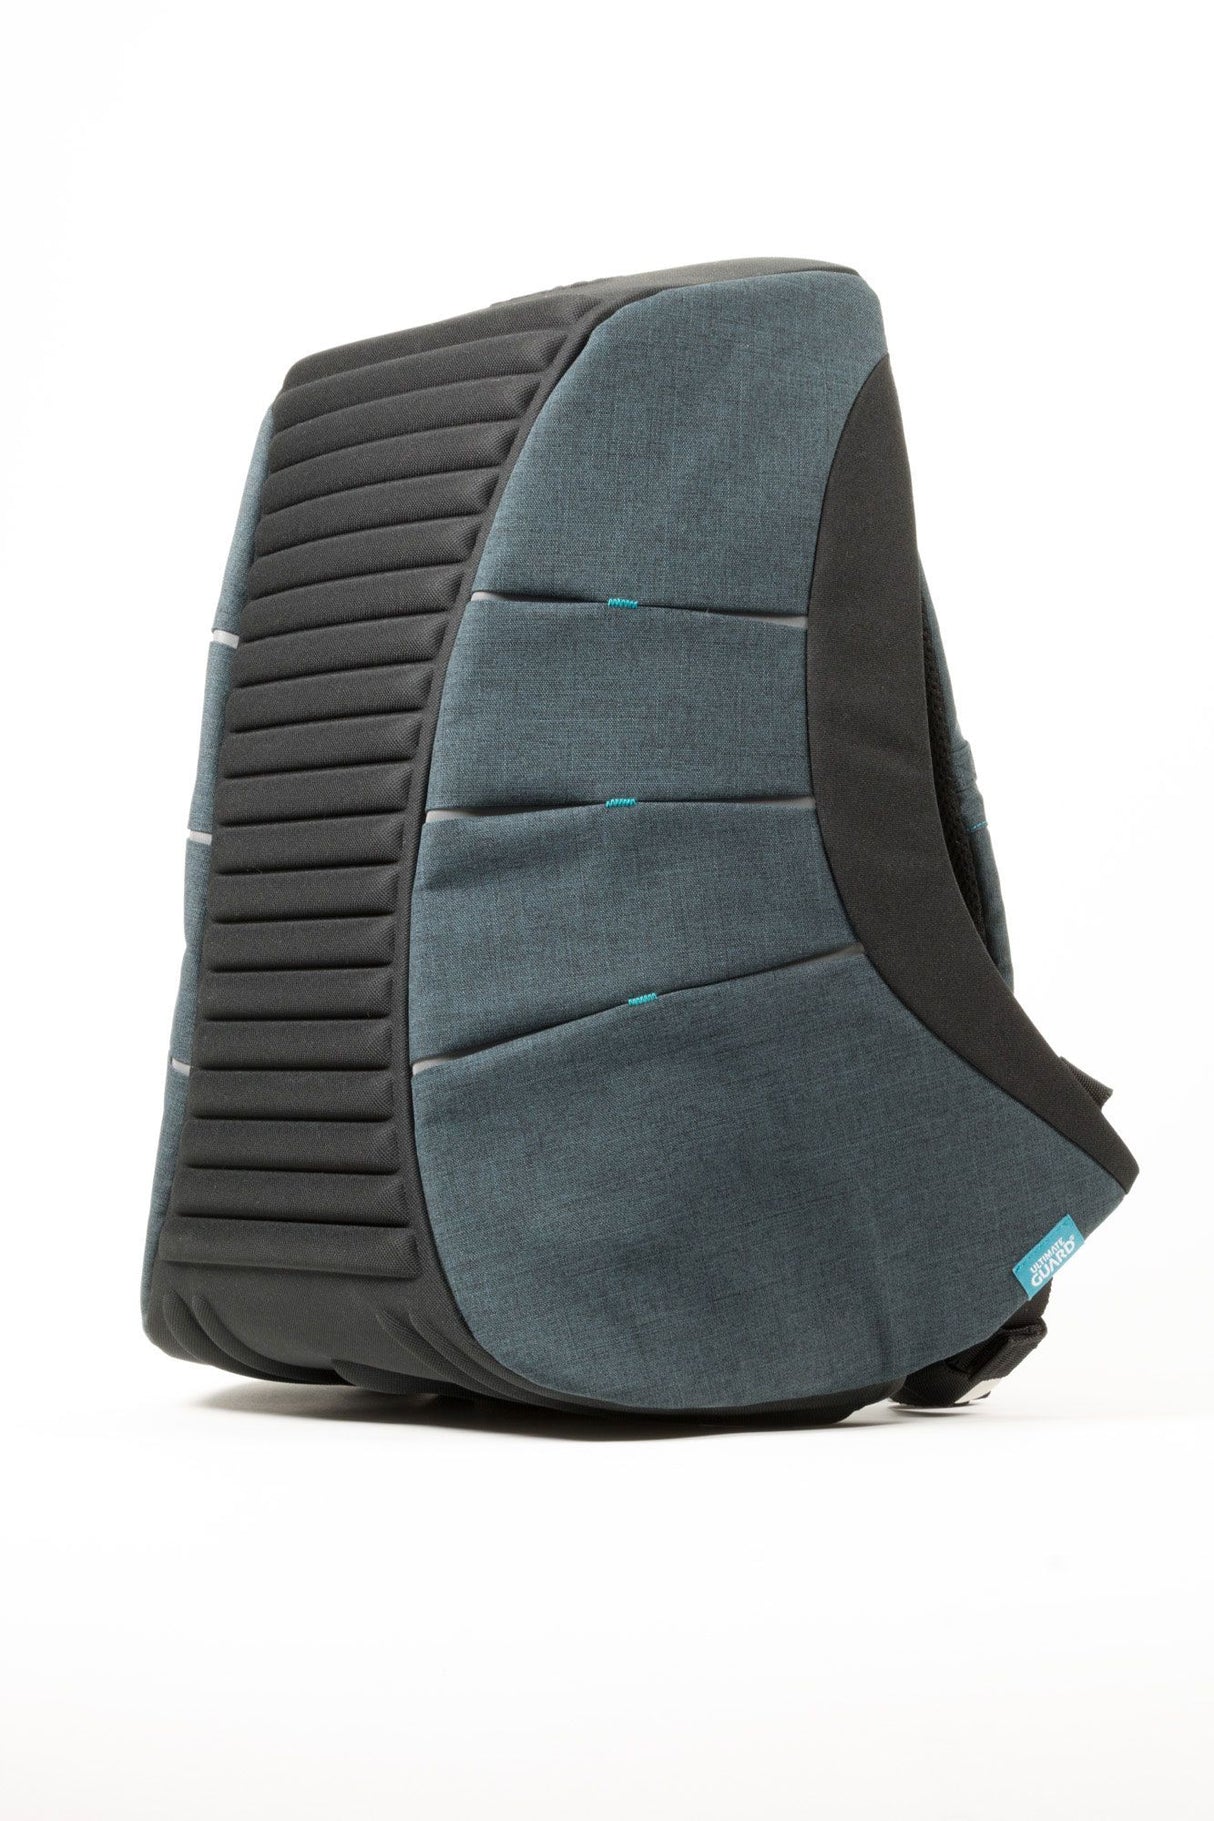 Ultimate Guard: Anti-Theft Backpack - Ammonite